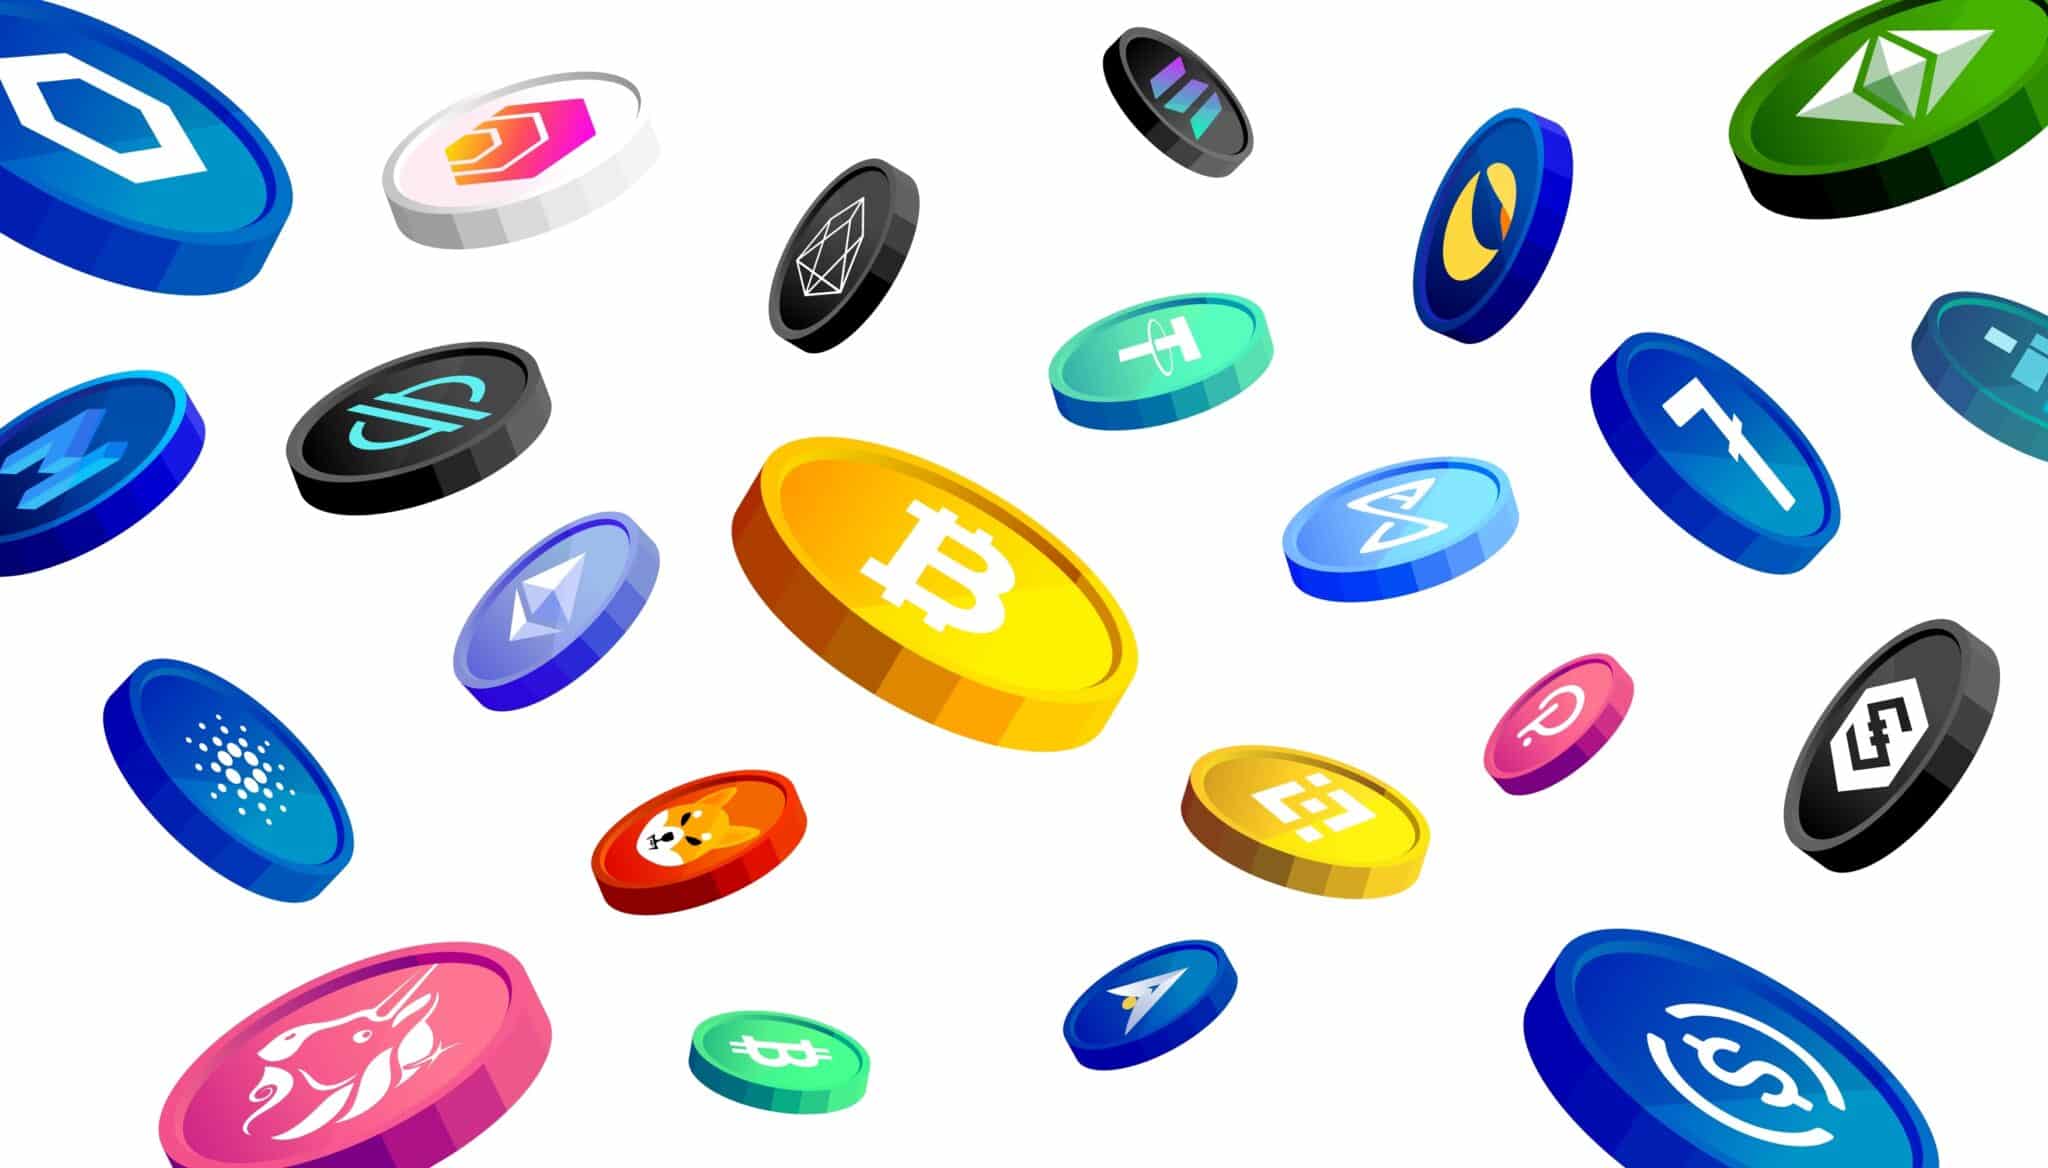 Cryptocurrency coins floating in the air on a white background.